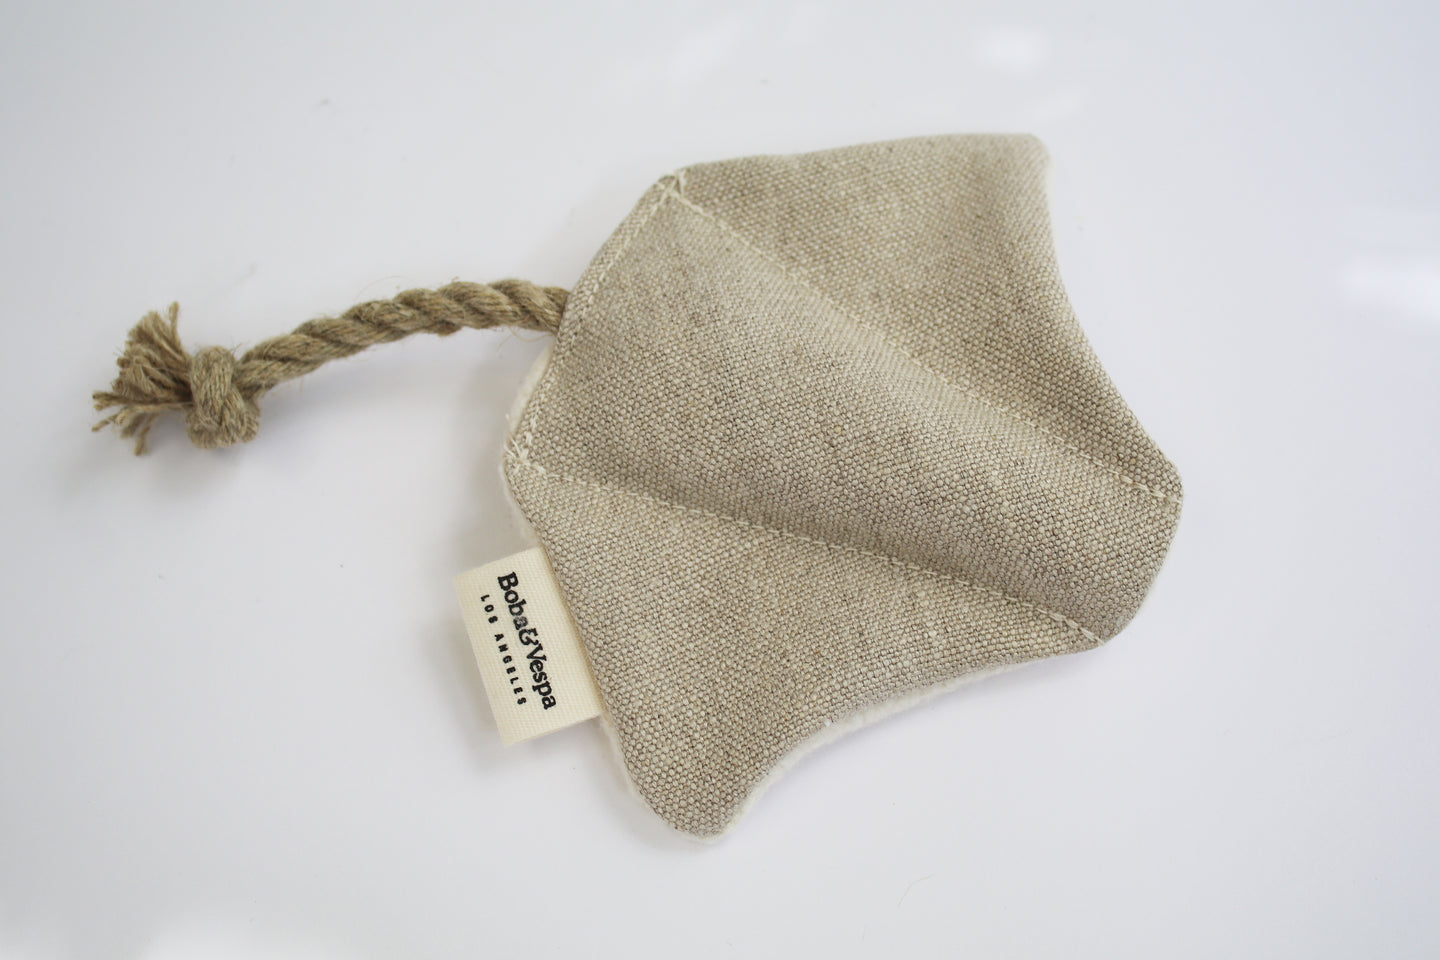 an up close look at a stingray cat toy made of hemp and organic cotton. The stingray has a rope tail.